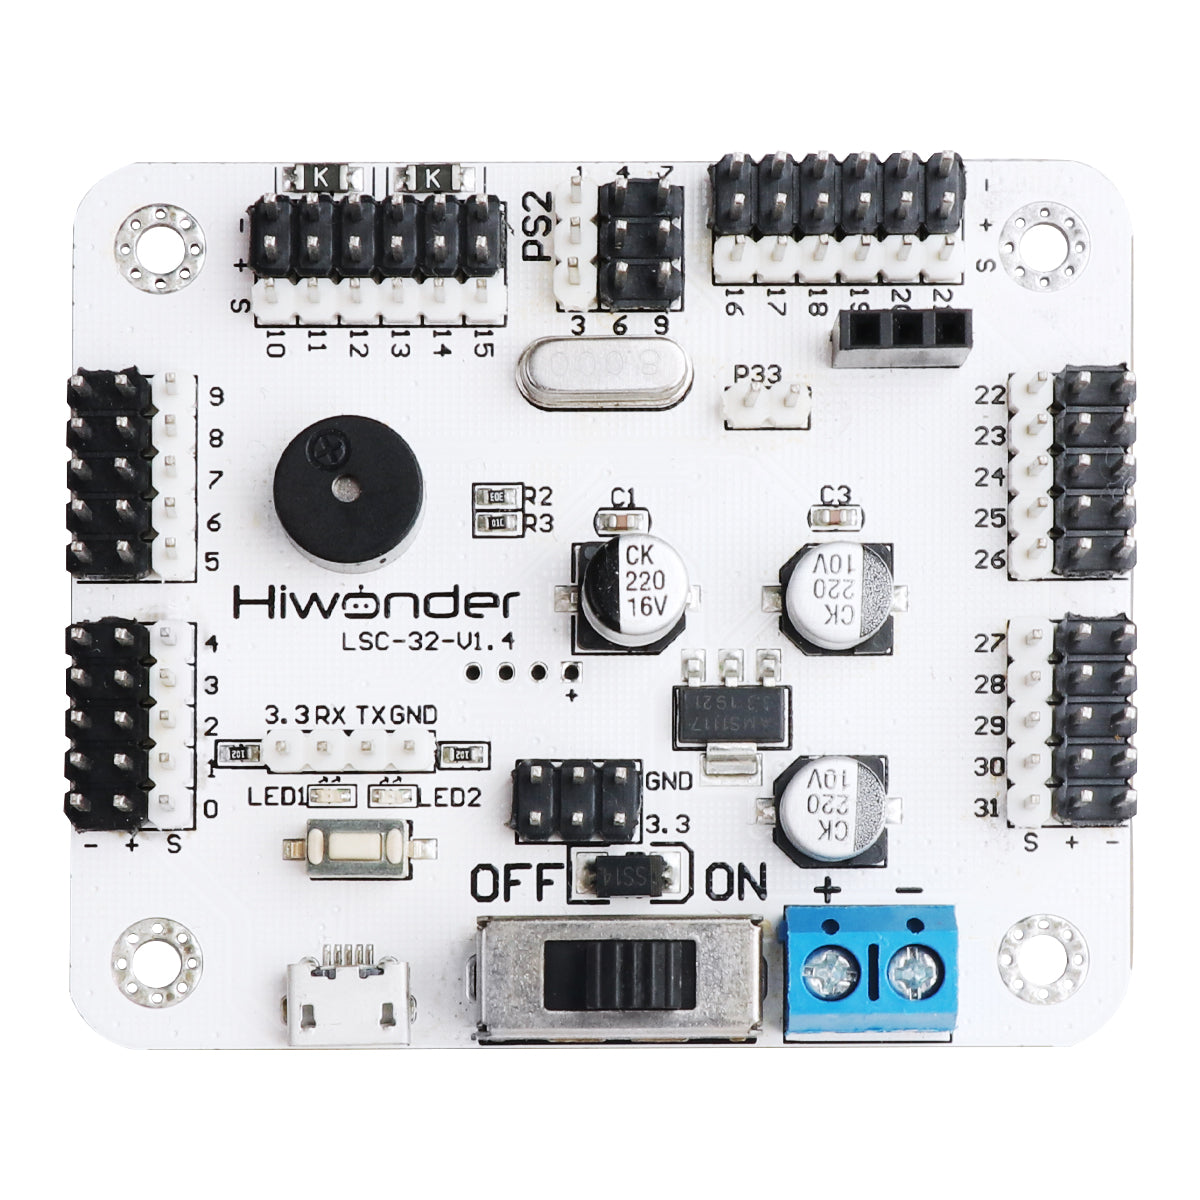 LSC-32: Hiwonder 32 Channel Digital Servo Controller with 16M Memory/ Arduino Compatible